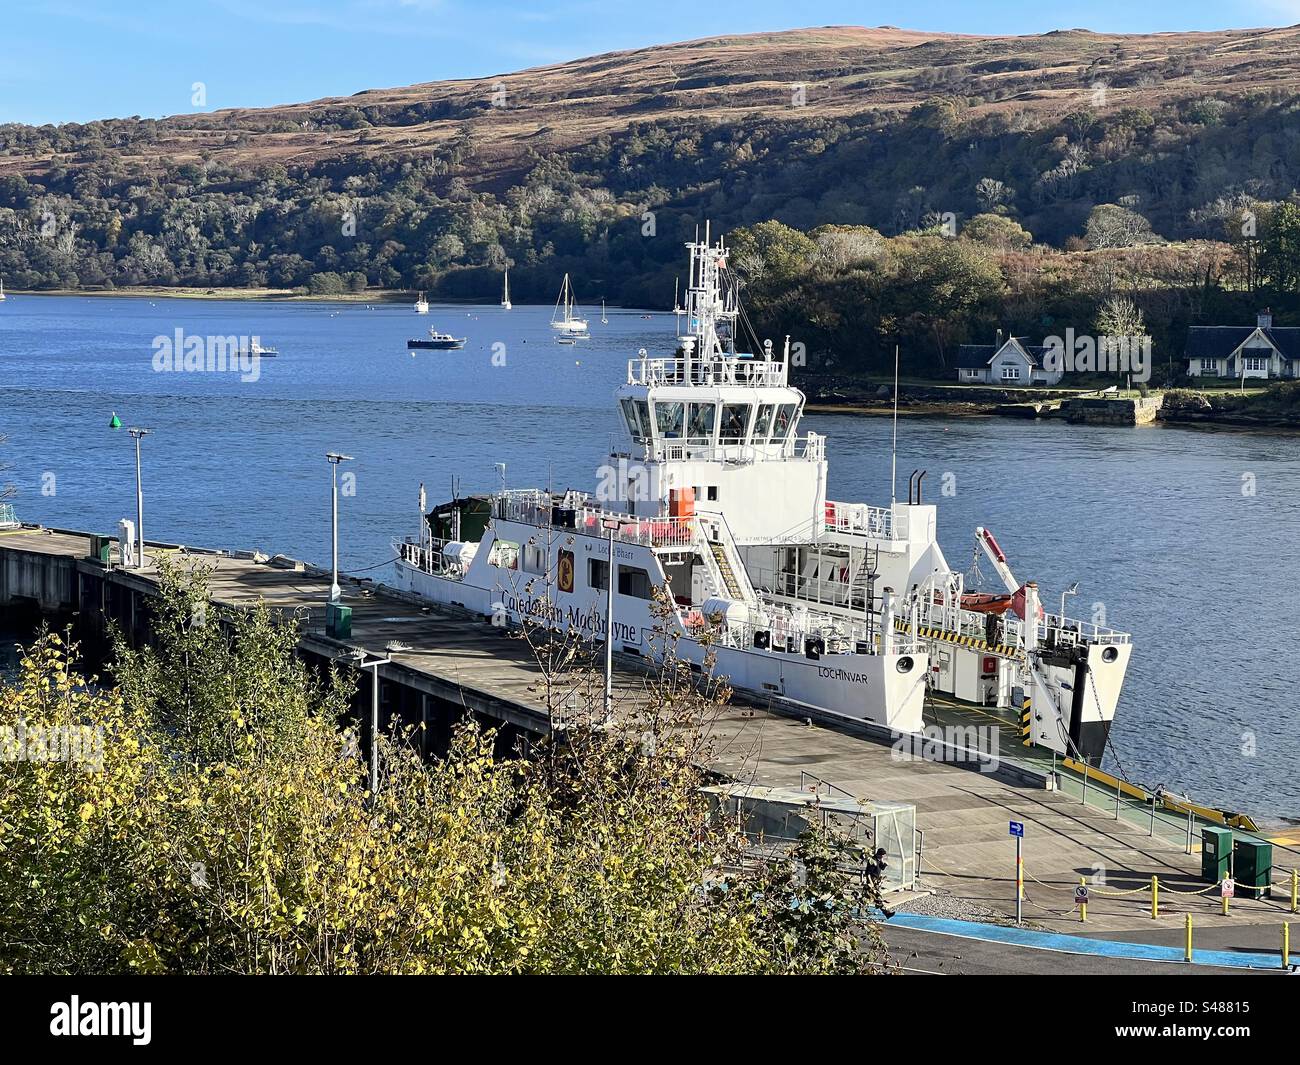 A ferry moored in Loch Aline harbour on a calm autumn day, with the loch and sailing boats visible in the background. The ferry runs between Loch Aline and Fishnish. Stock Photo